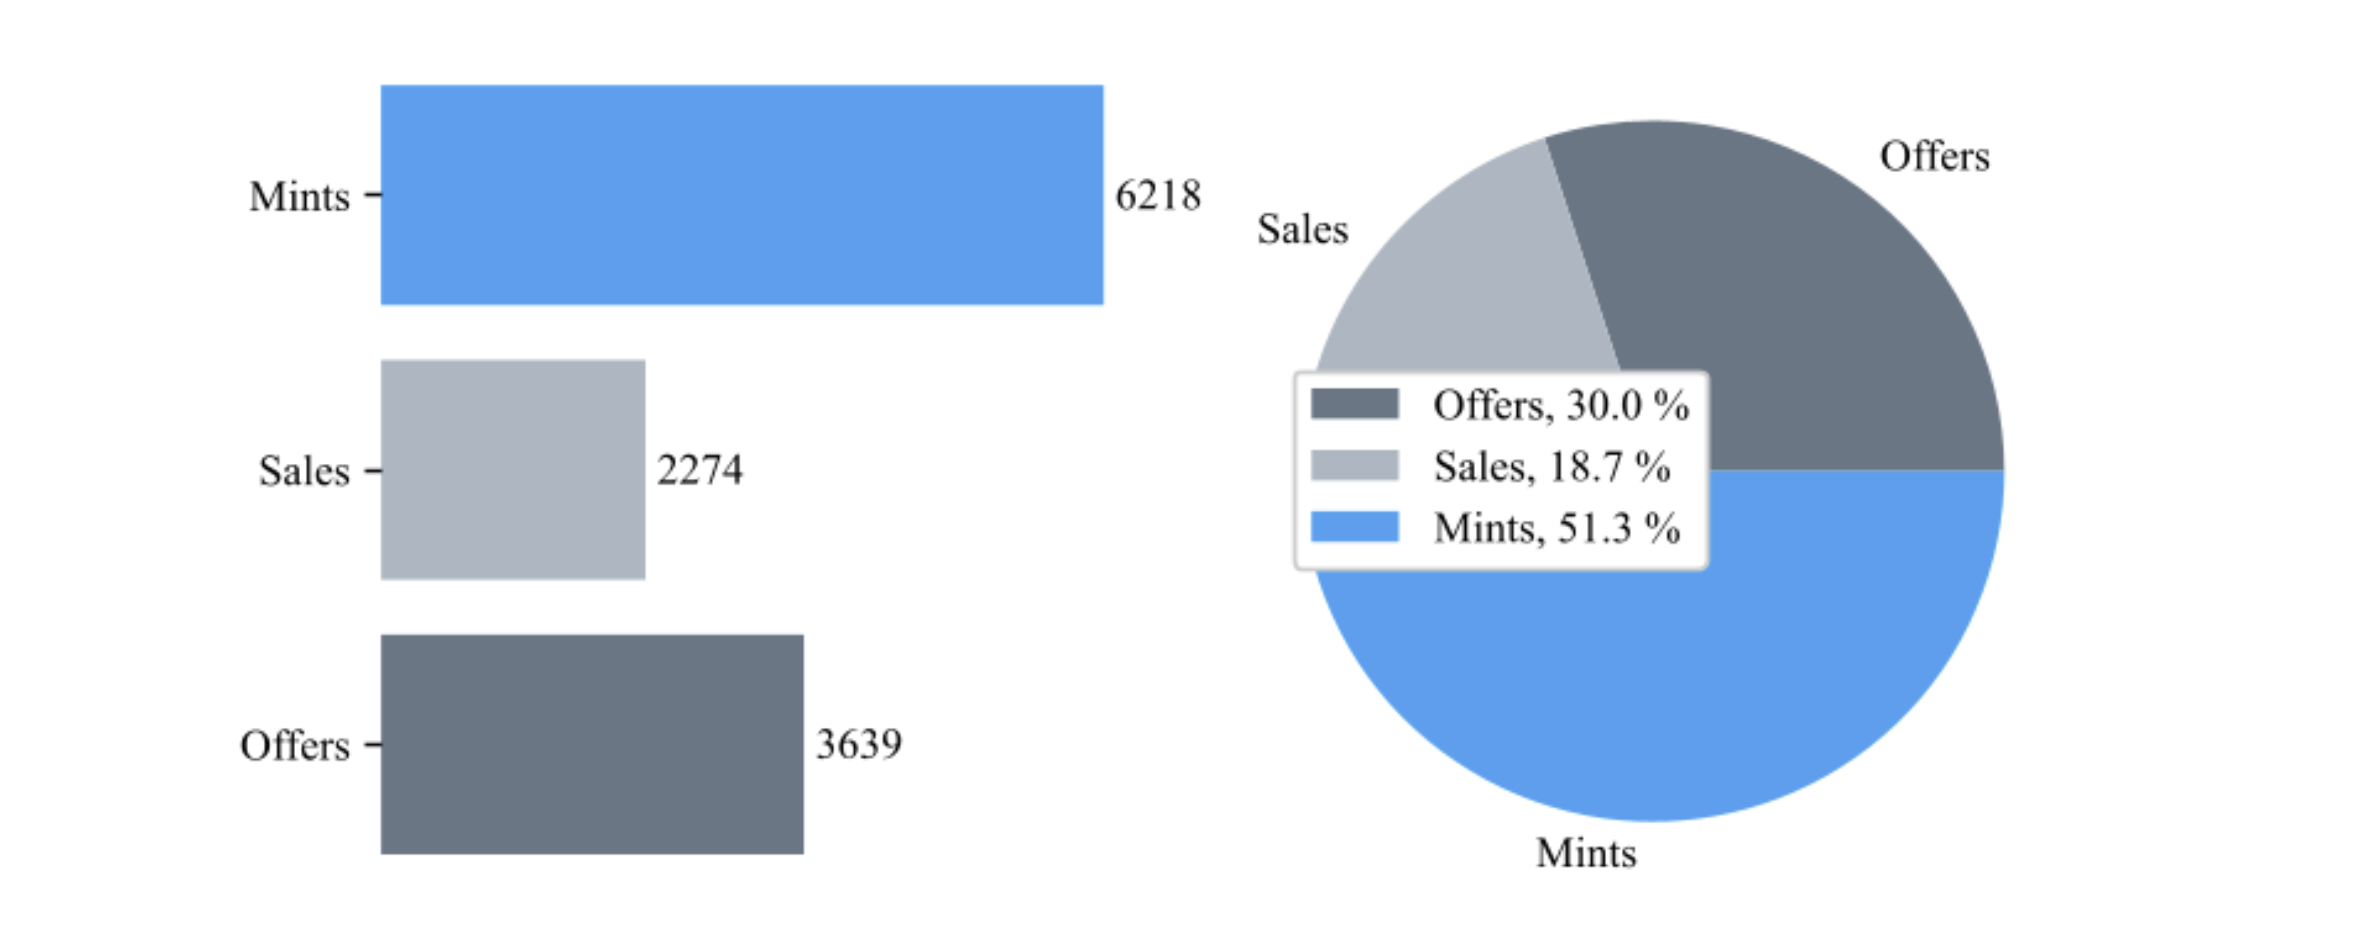 Mints, sales, and offers in absolute and relative terms